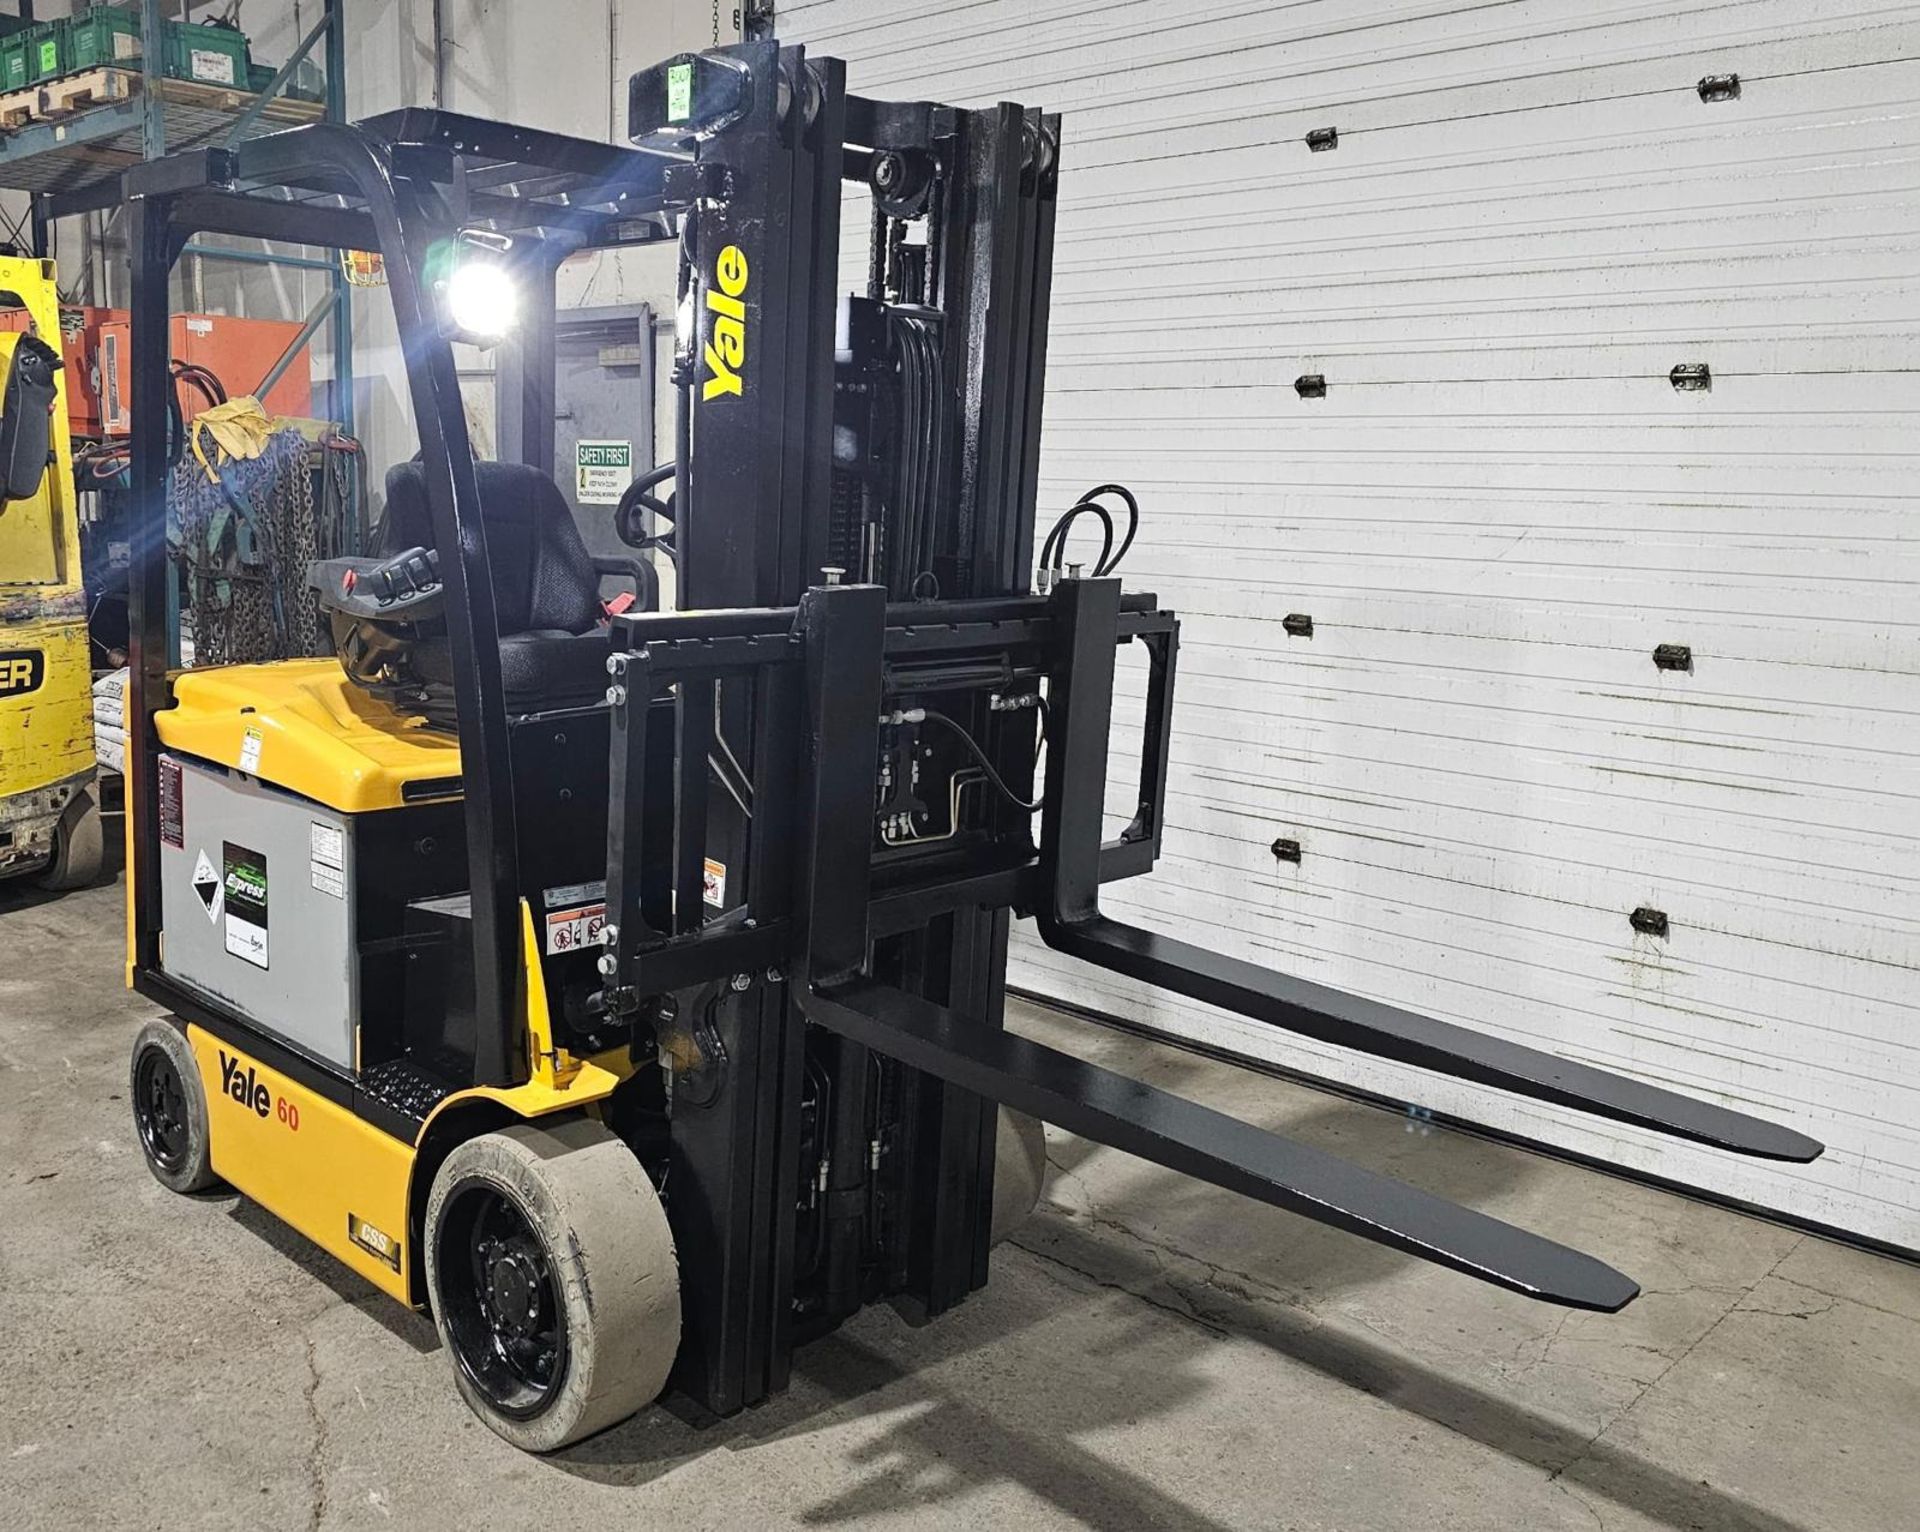 2017 Yale 6,000lbs Cpacity Electric Forklift 48V with NEW sideshift & Forks 3-STAGE MAST 187" lift - Image 7 of 8